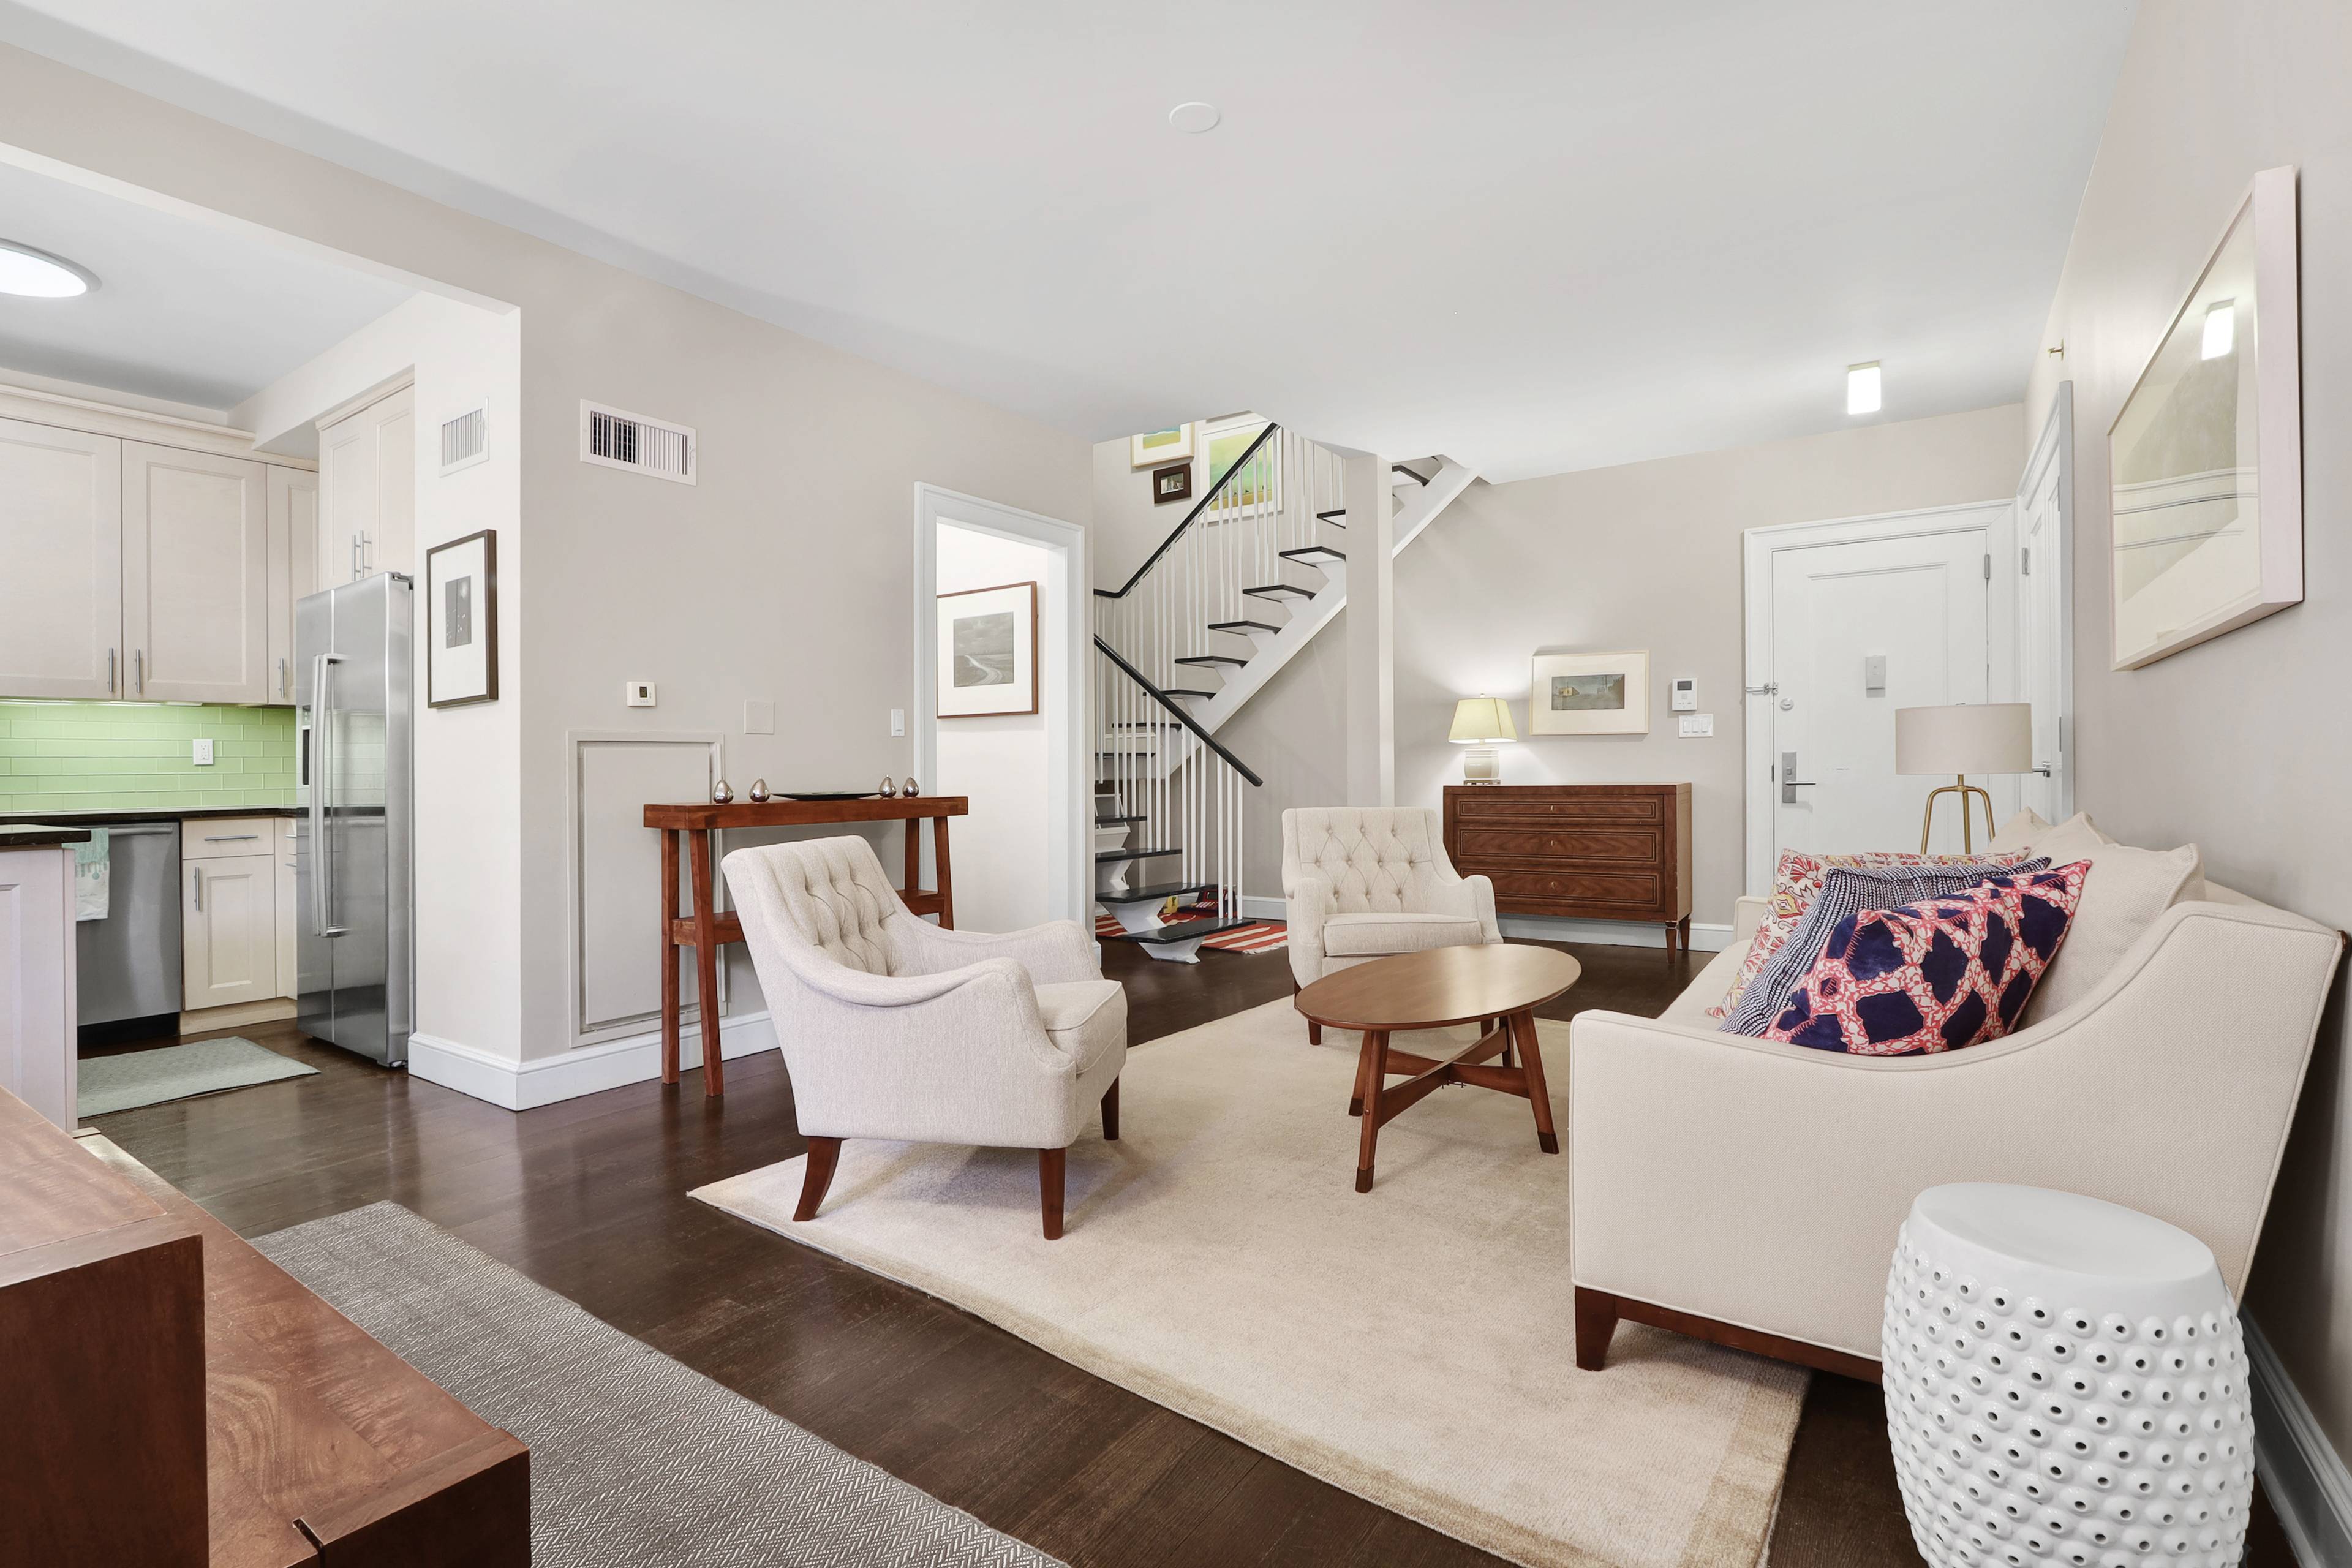 HOUSE OF SOUL COBBLE HILL COTTAGE CONDO DUPLEXED TOWNHOUSE LIKE, MOVE IN READY HEART WARMER TERRIFIC TREE VIEW, FEEL GOOD FIND IN PRIME COBBLE HILL You want a townhouse vibe, ...